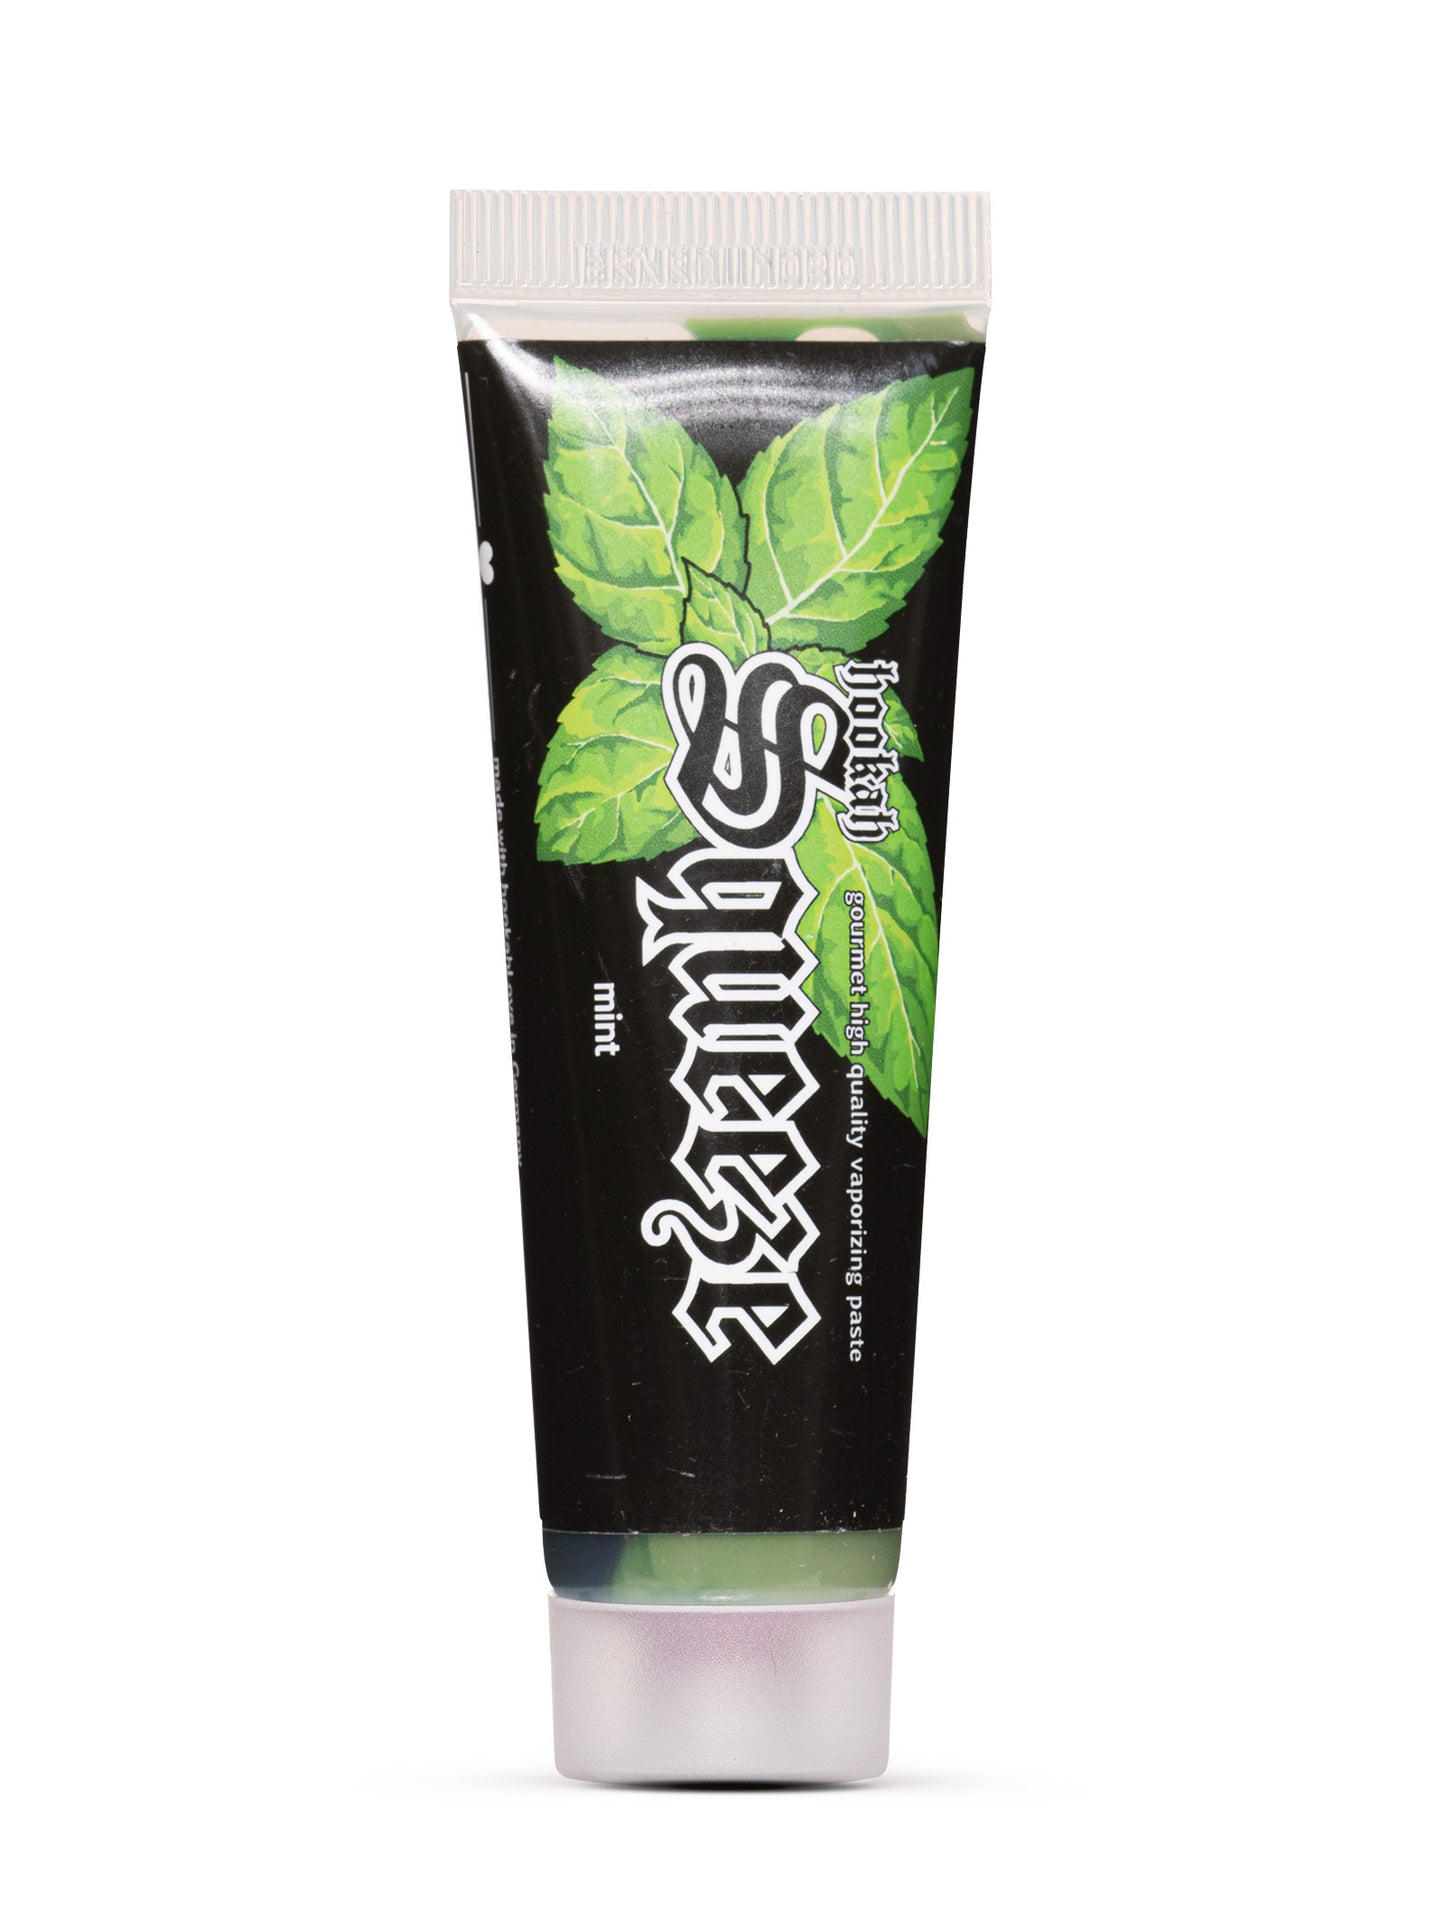 Hookah Squeeze 25g Nicotine Free - Mint